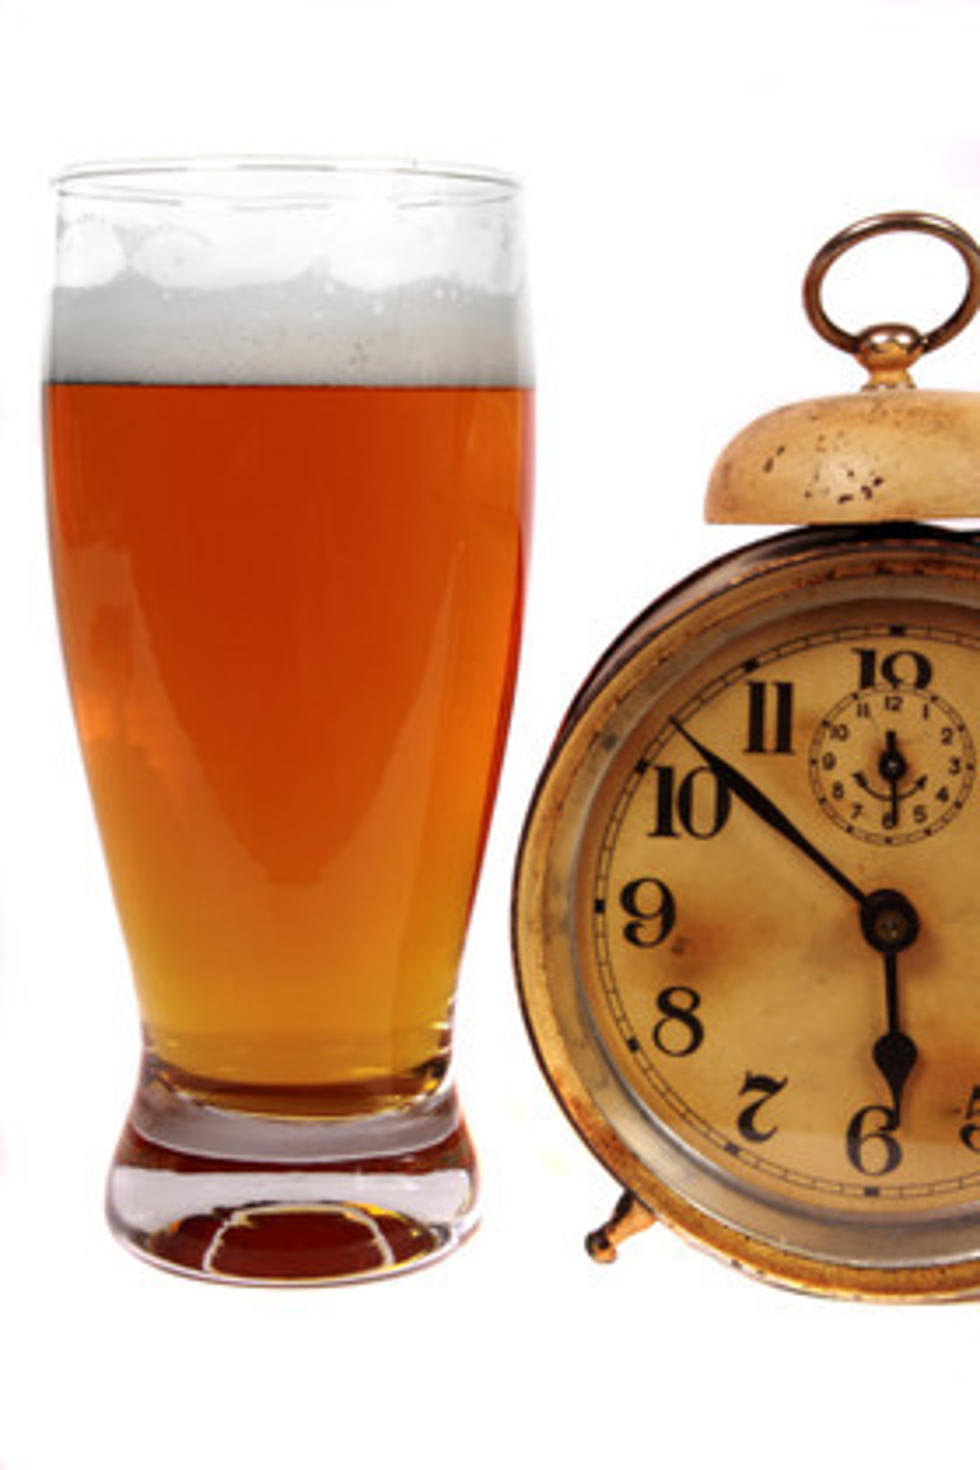 Don’t Waste Flat Beer It’s Alcohol Abuse – USE IT!